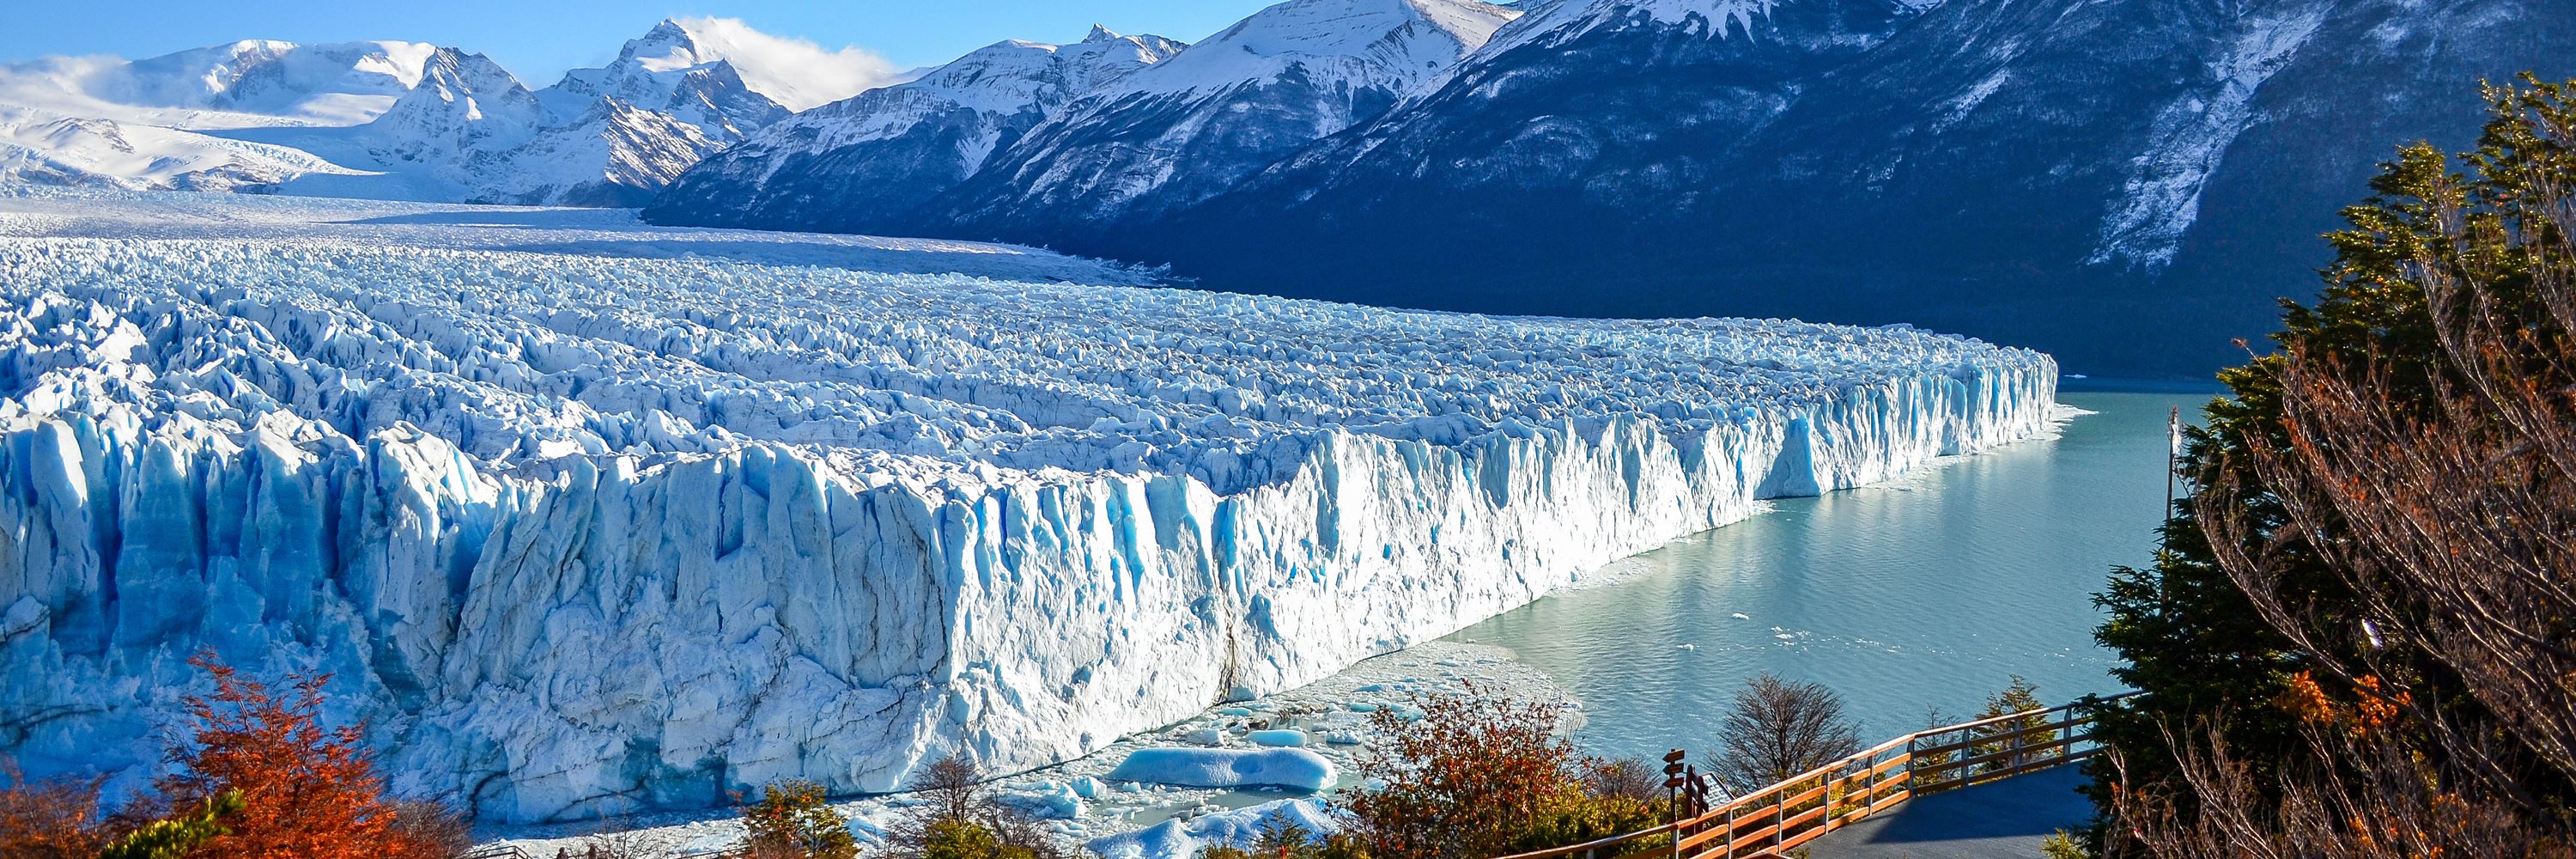 Patagonia highlights guide | Audley Travel CA